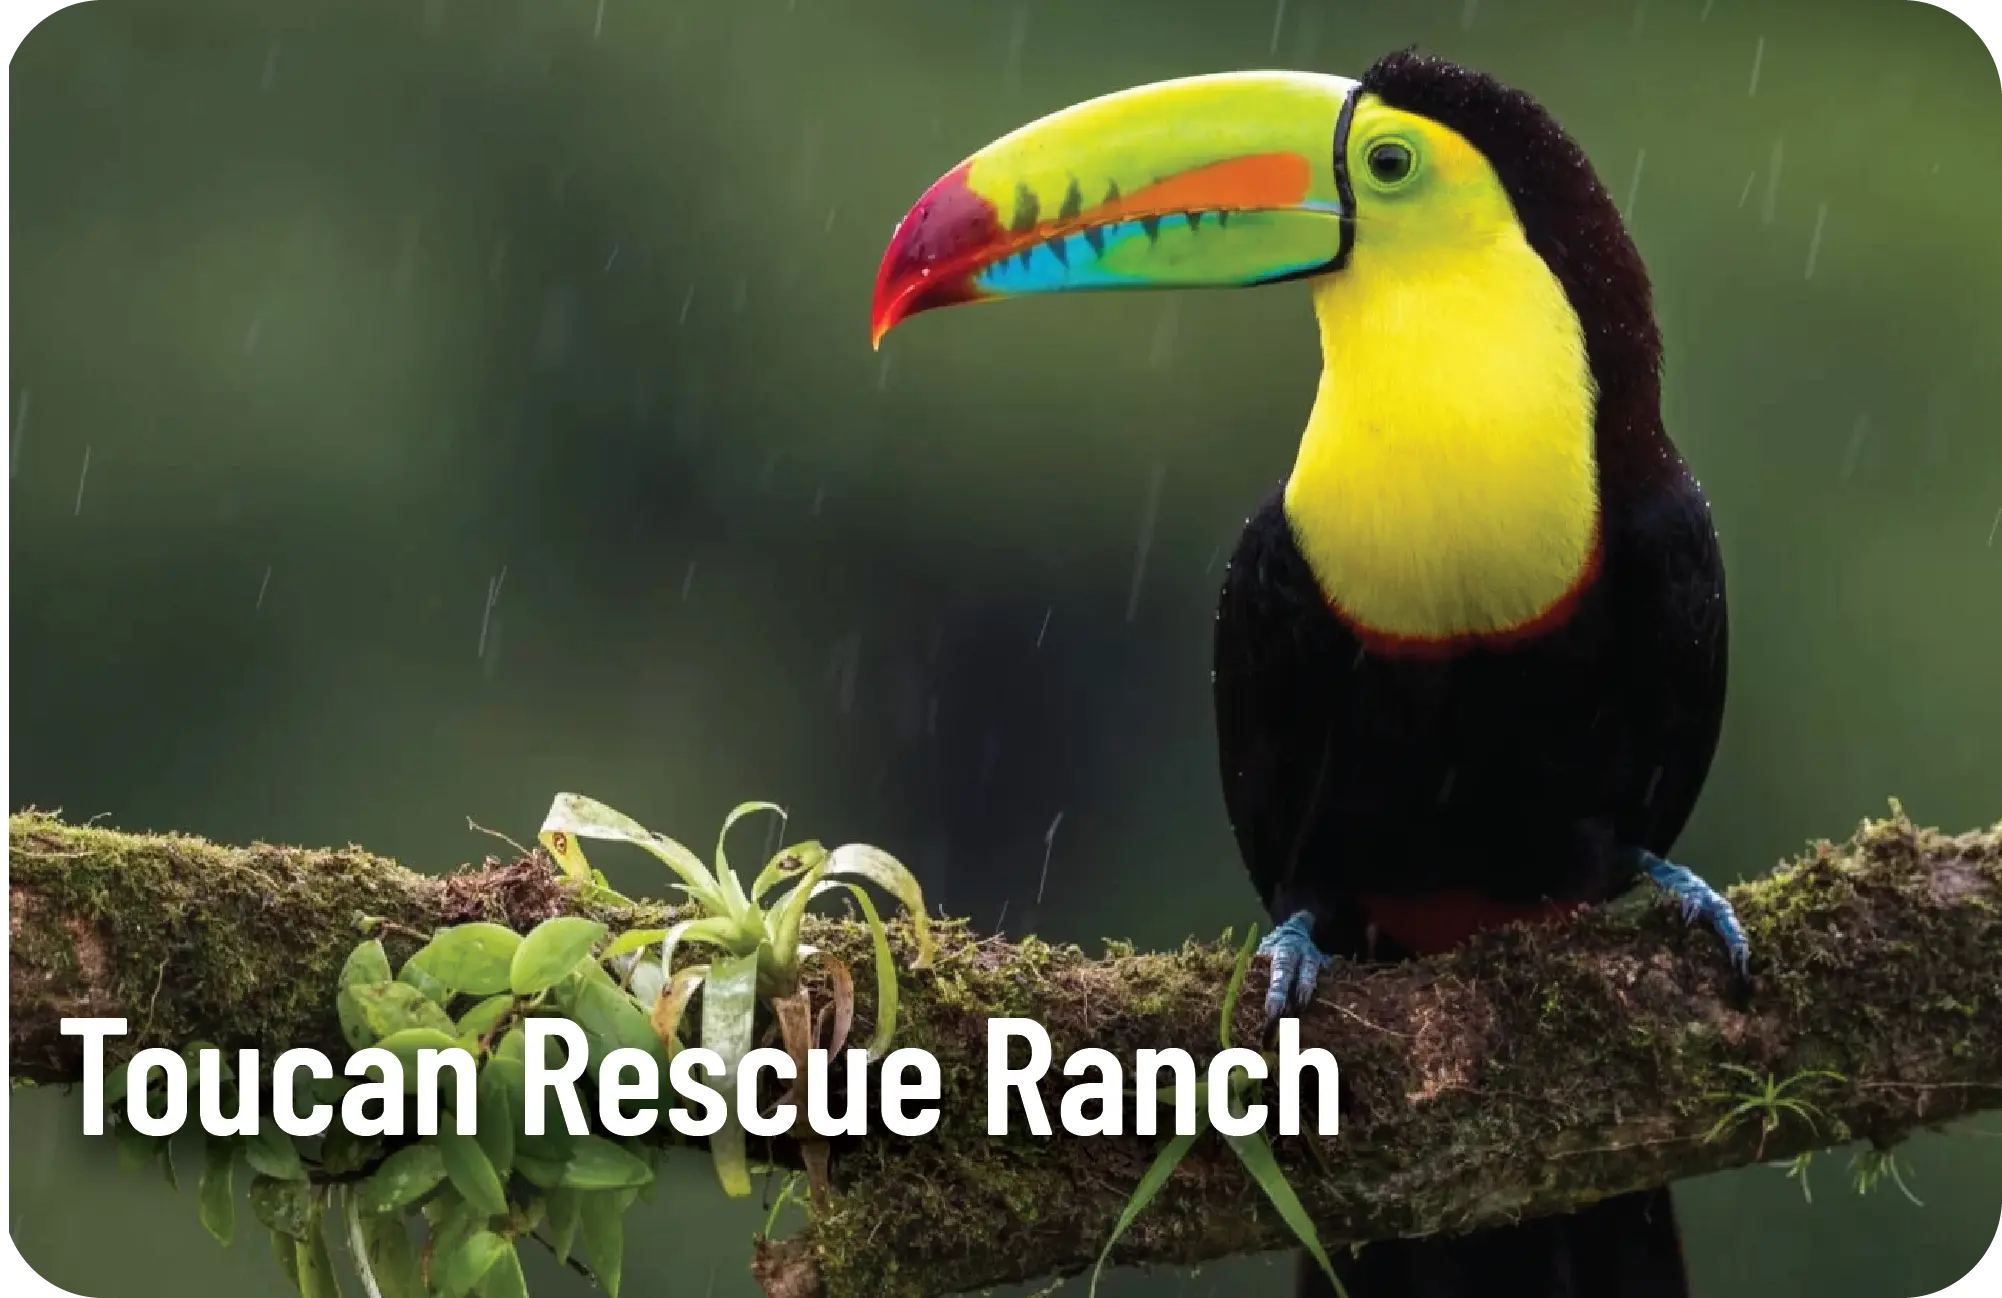 Toucan Rescue Ranch - Spanish Immersion Trips - Common Ground International